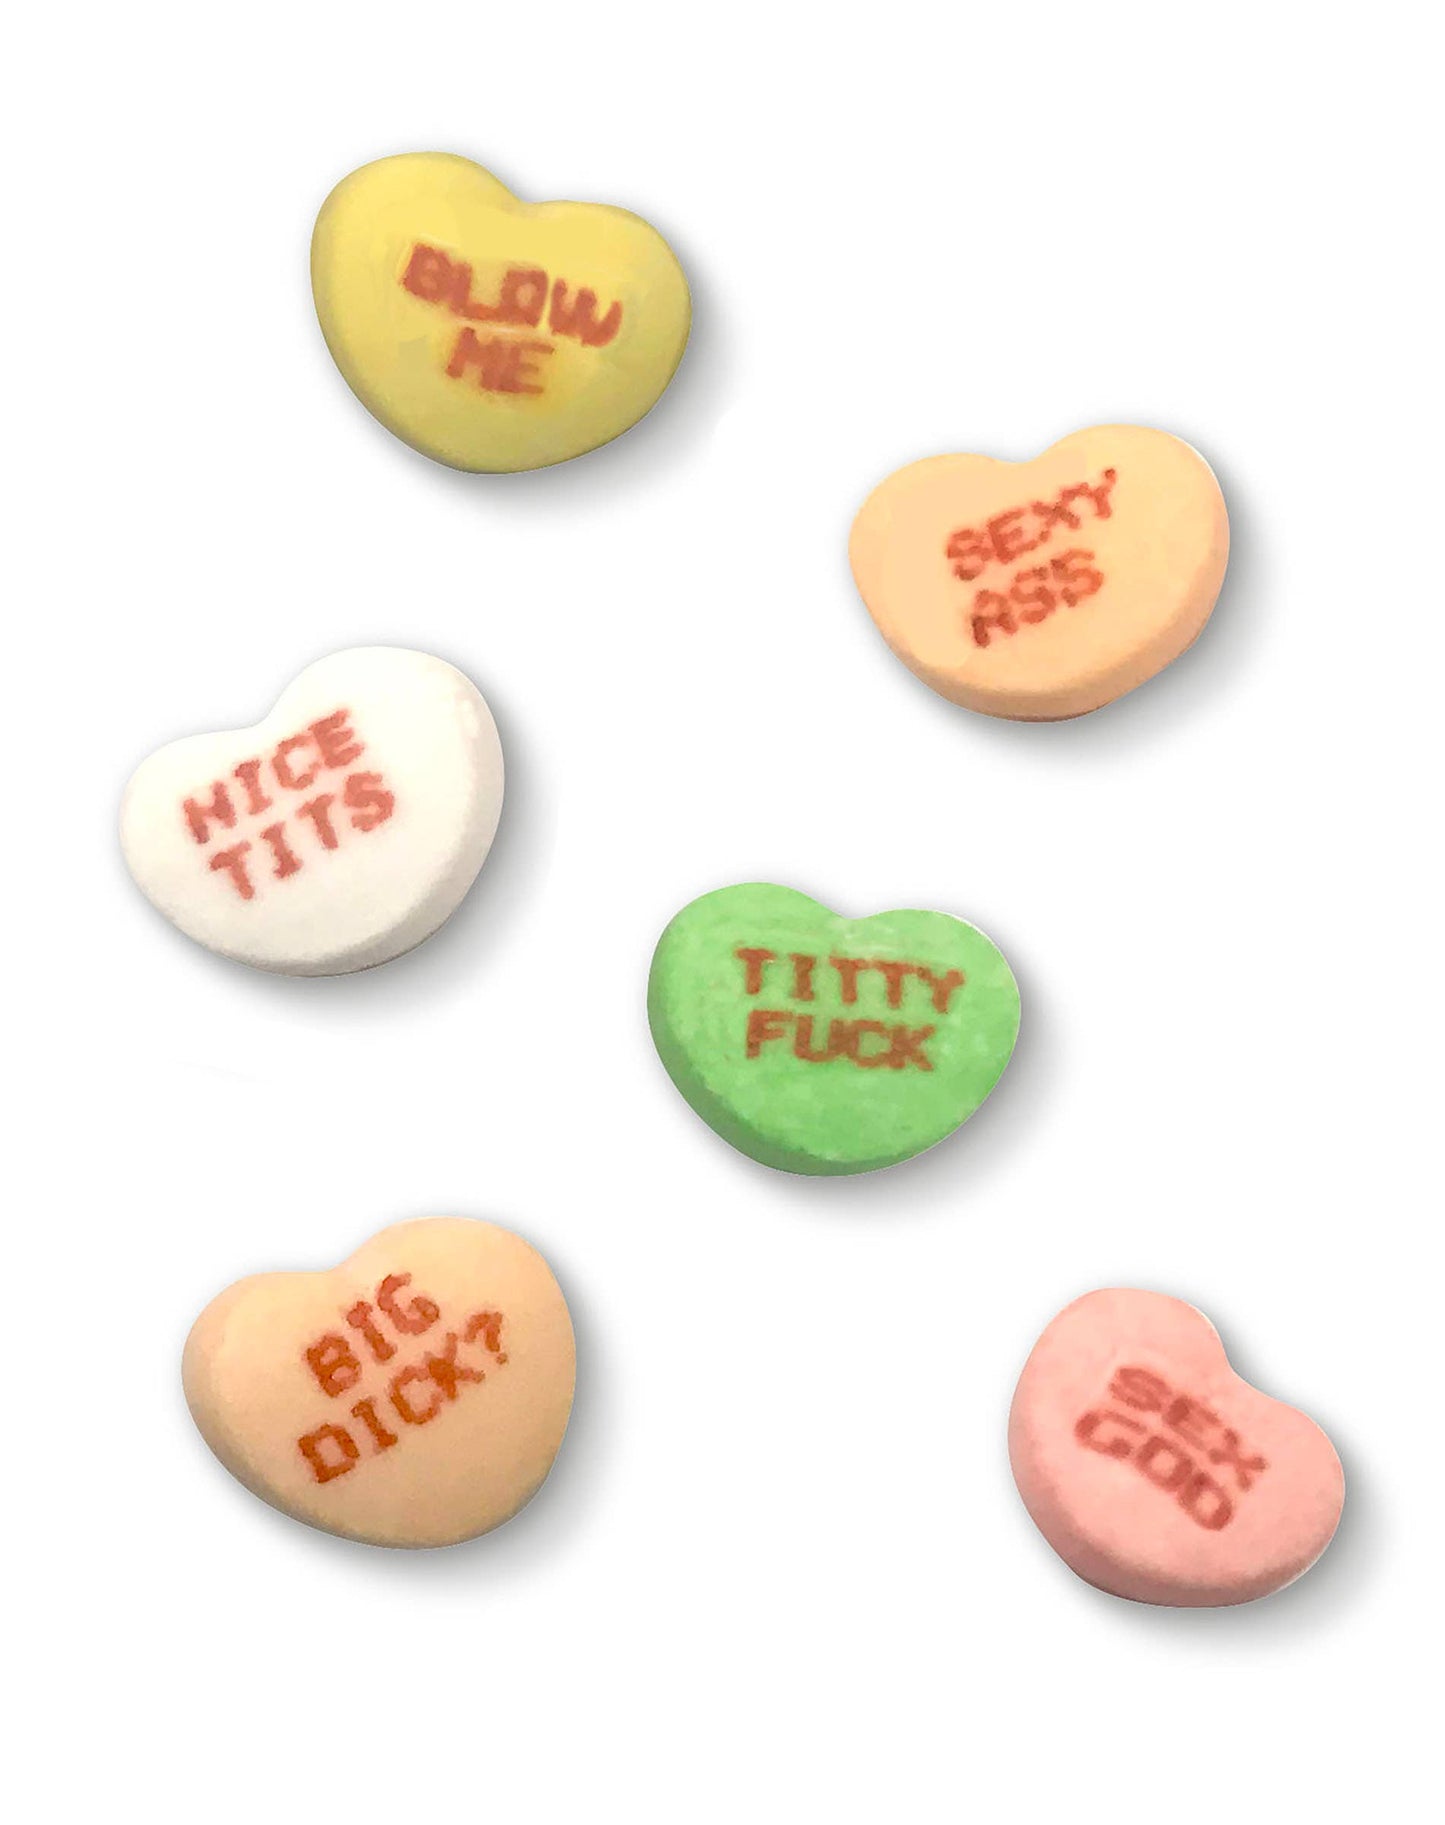 X-Rated Valentine's Conversation Heart Candy